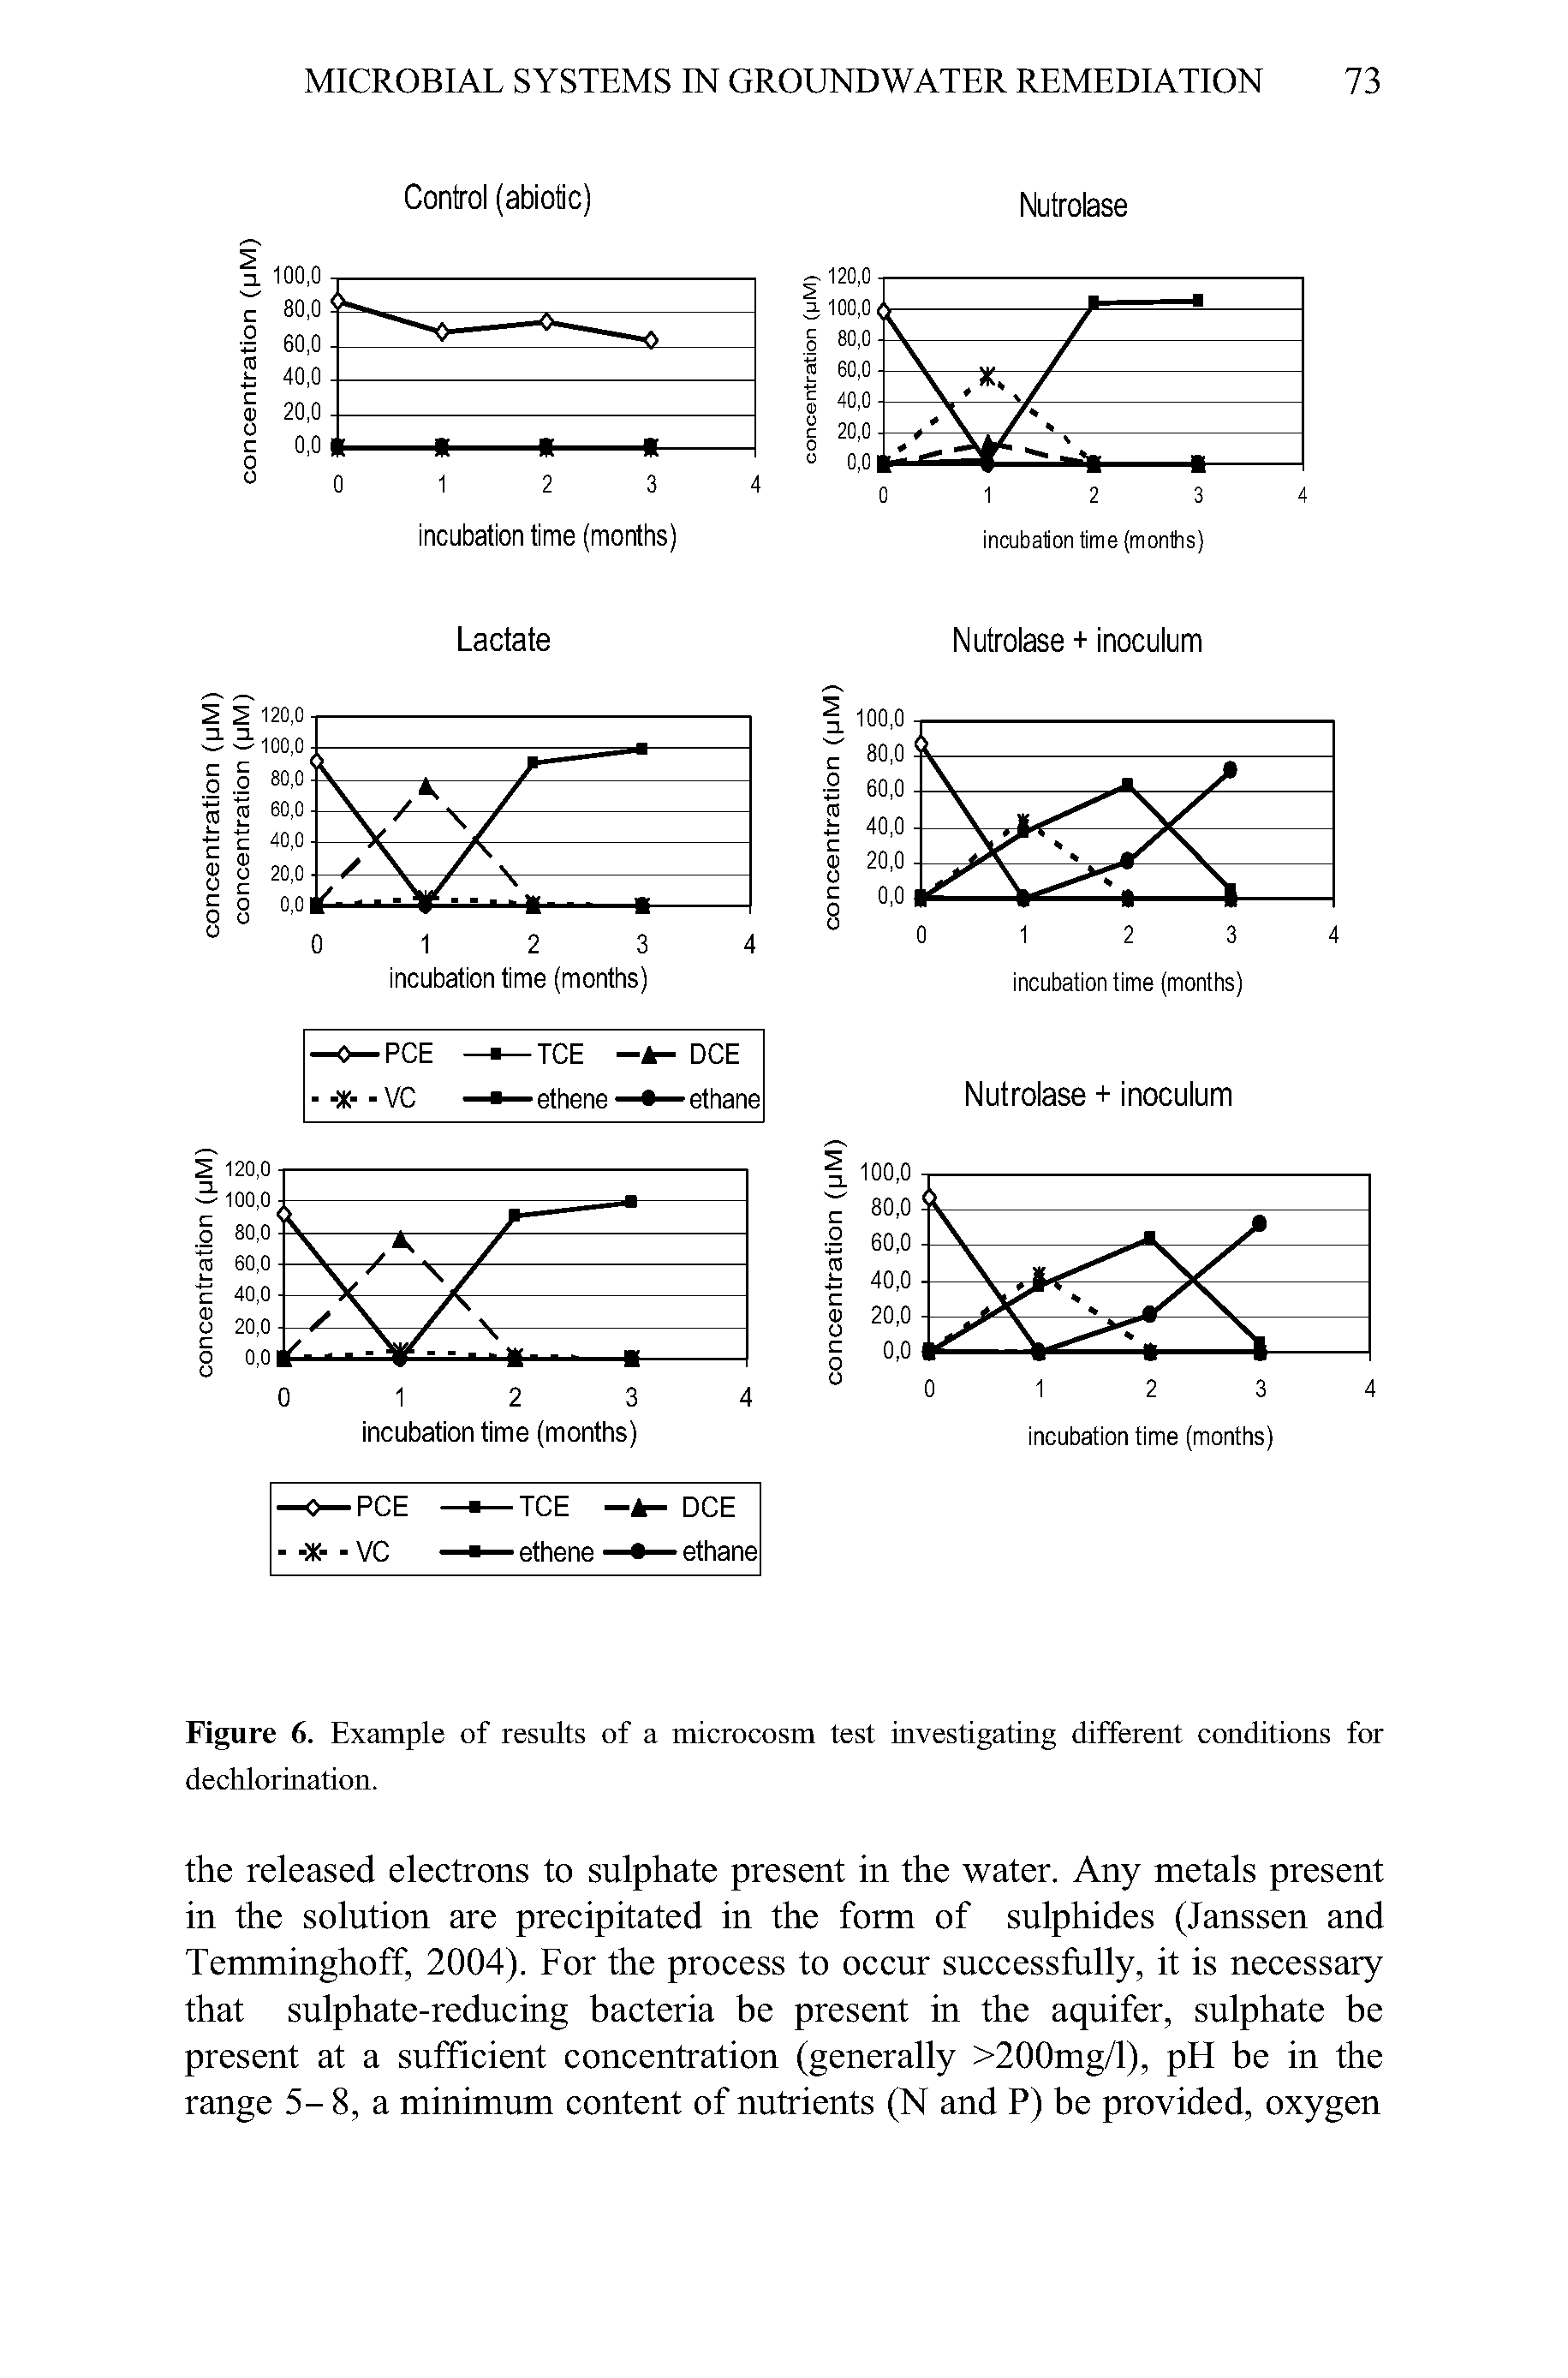 Figure 6. Example of results of a microcosm test investigating different conditions for dechlorination.